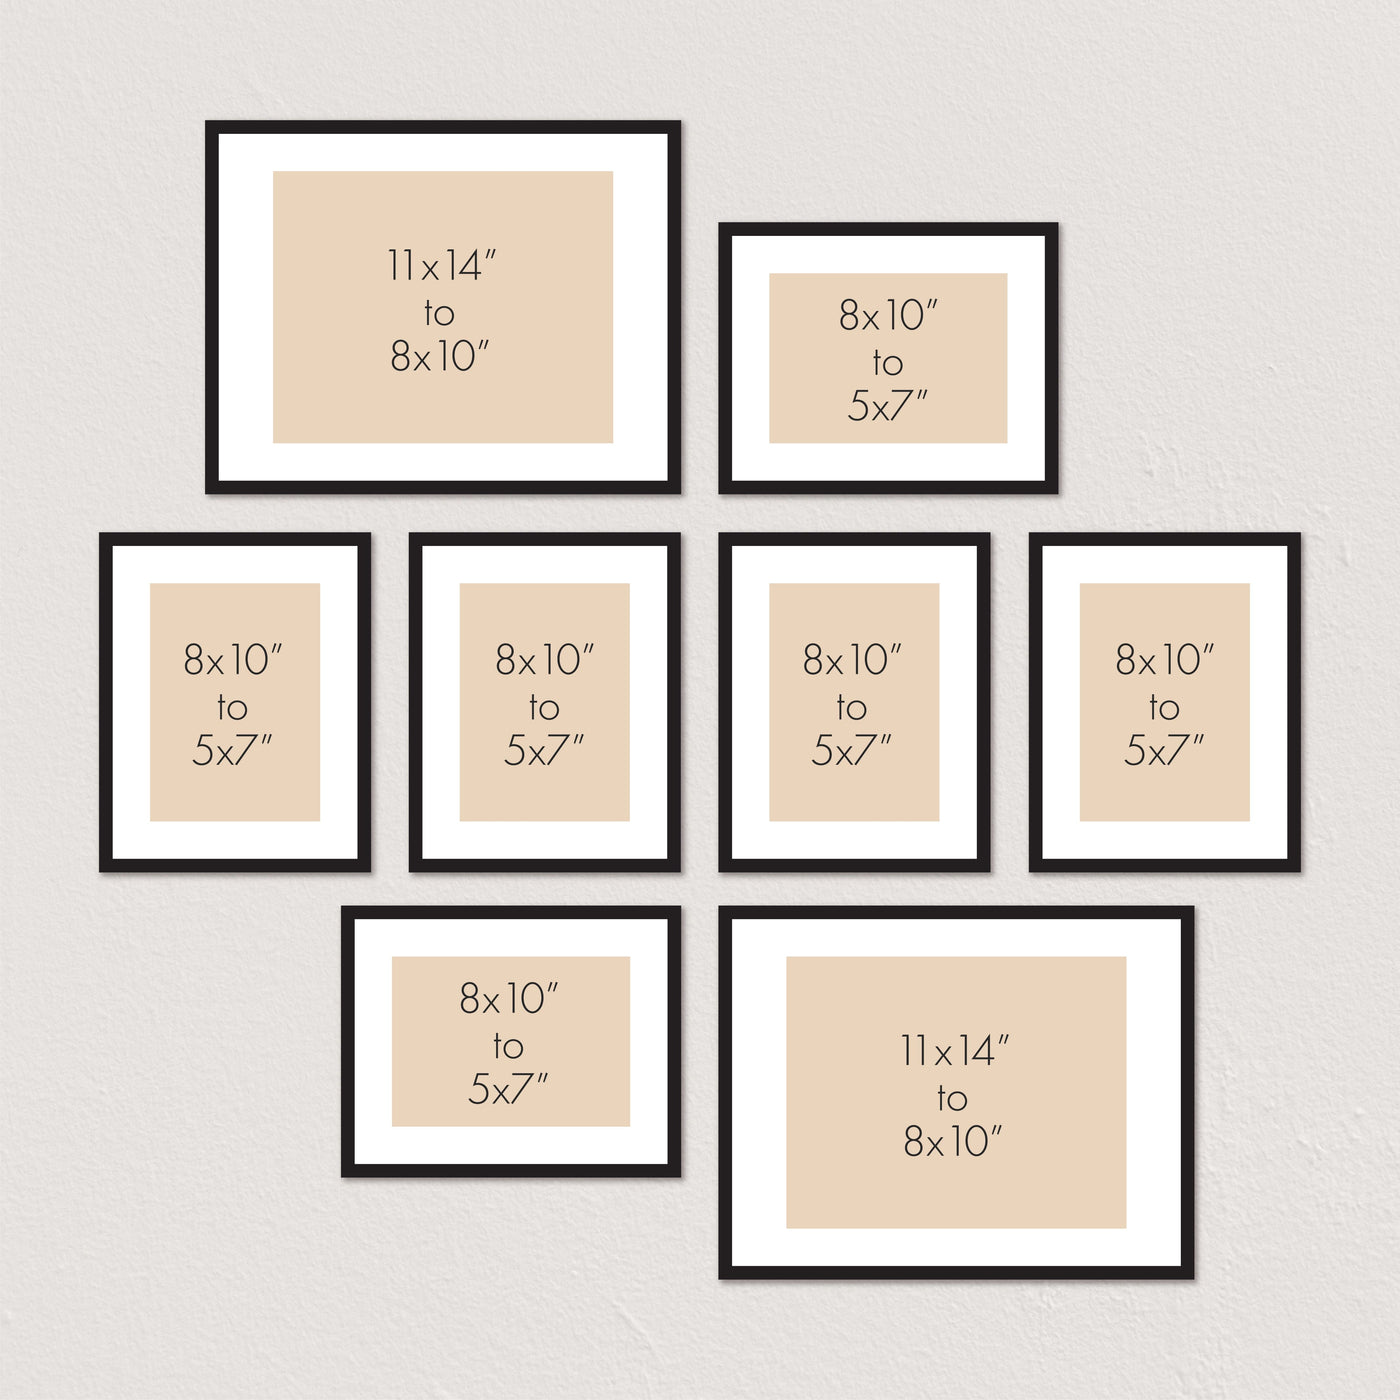 Deluxe Gallery Photo Wall Frame Set D - 8 Frames from our Australian Made Gallery Photo Wall Frame Sets collection by Profile Products Australia